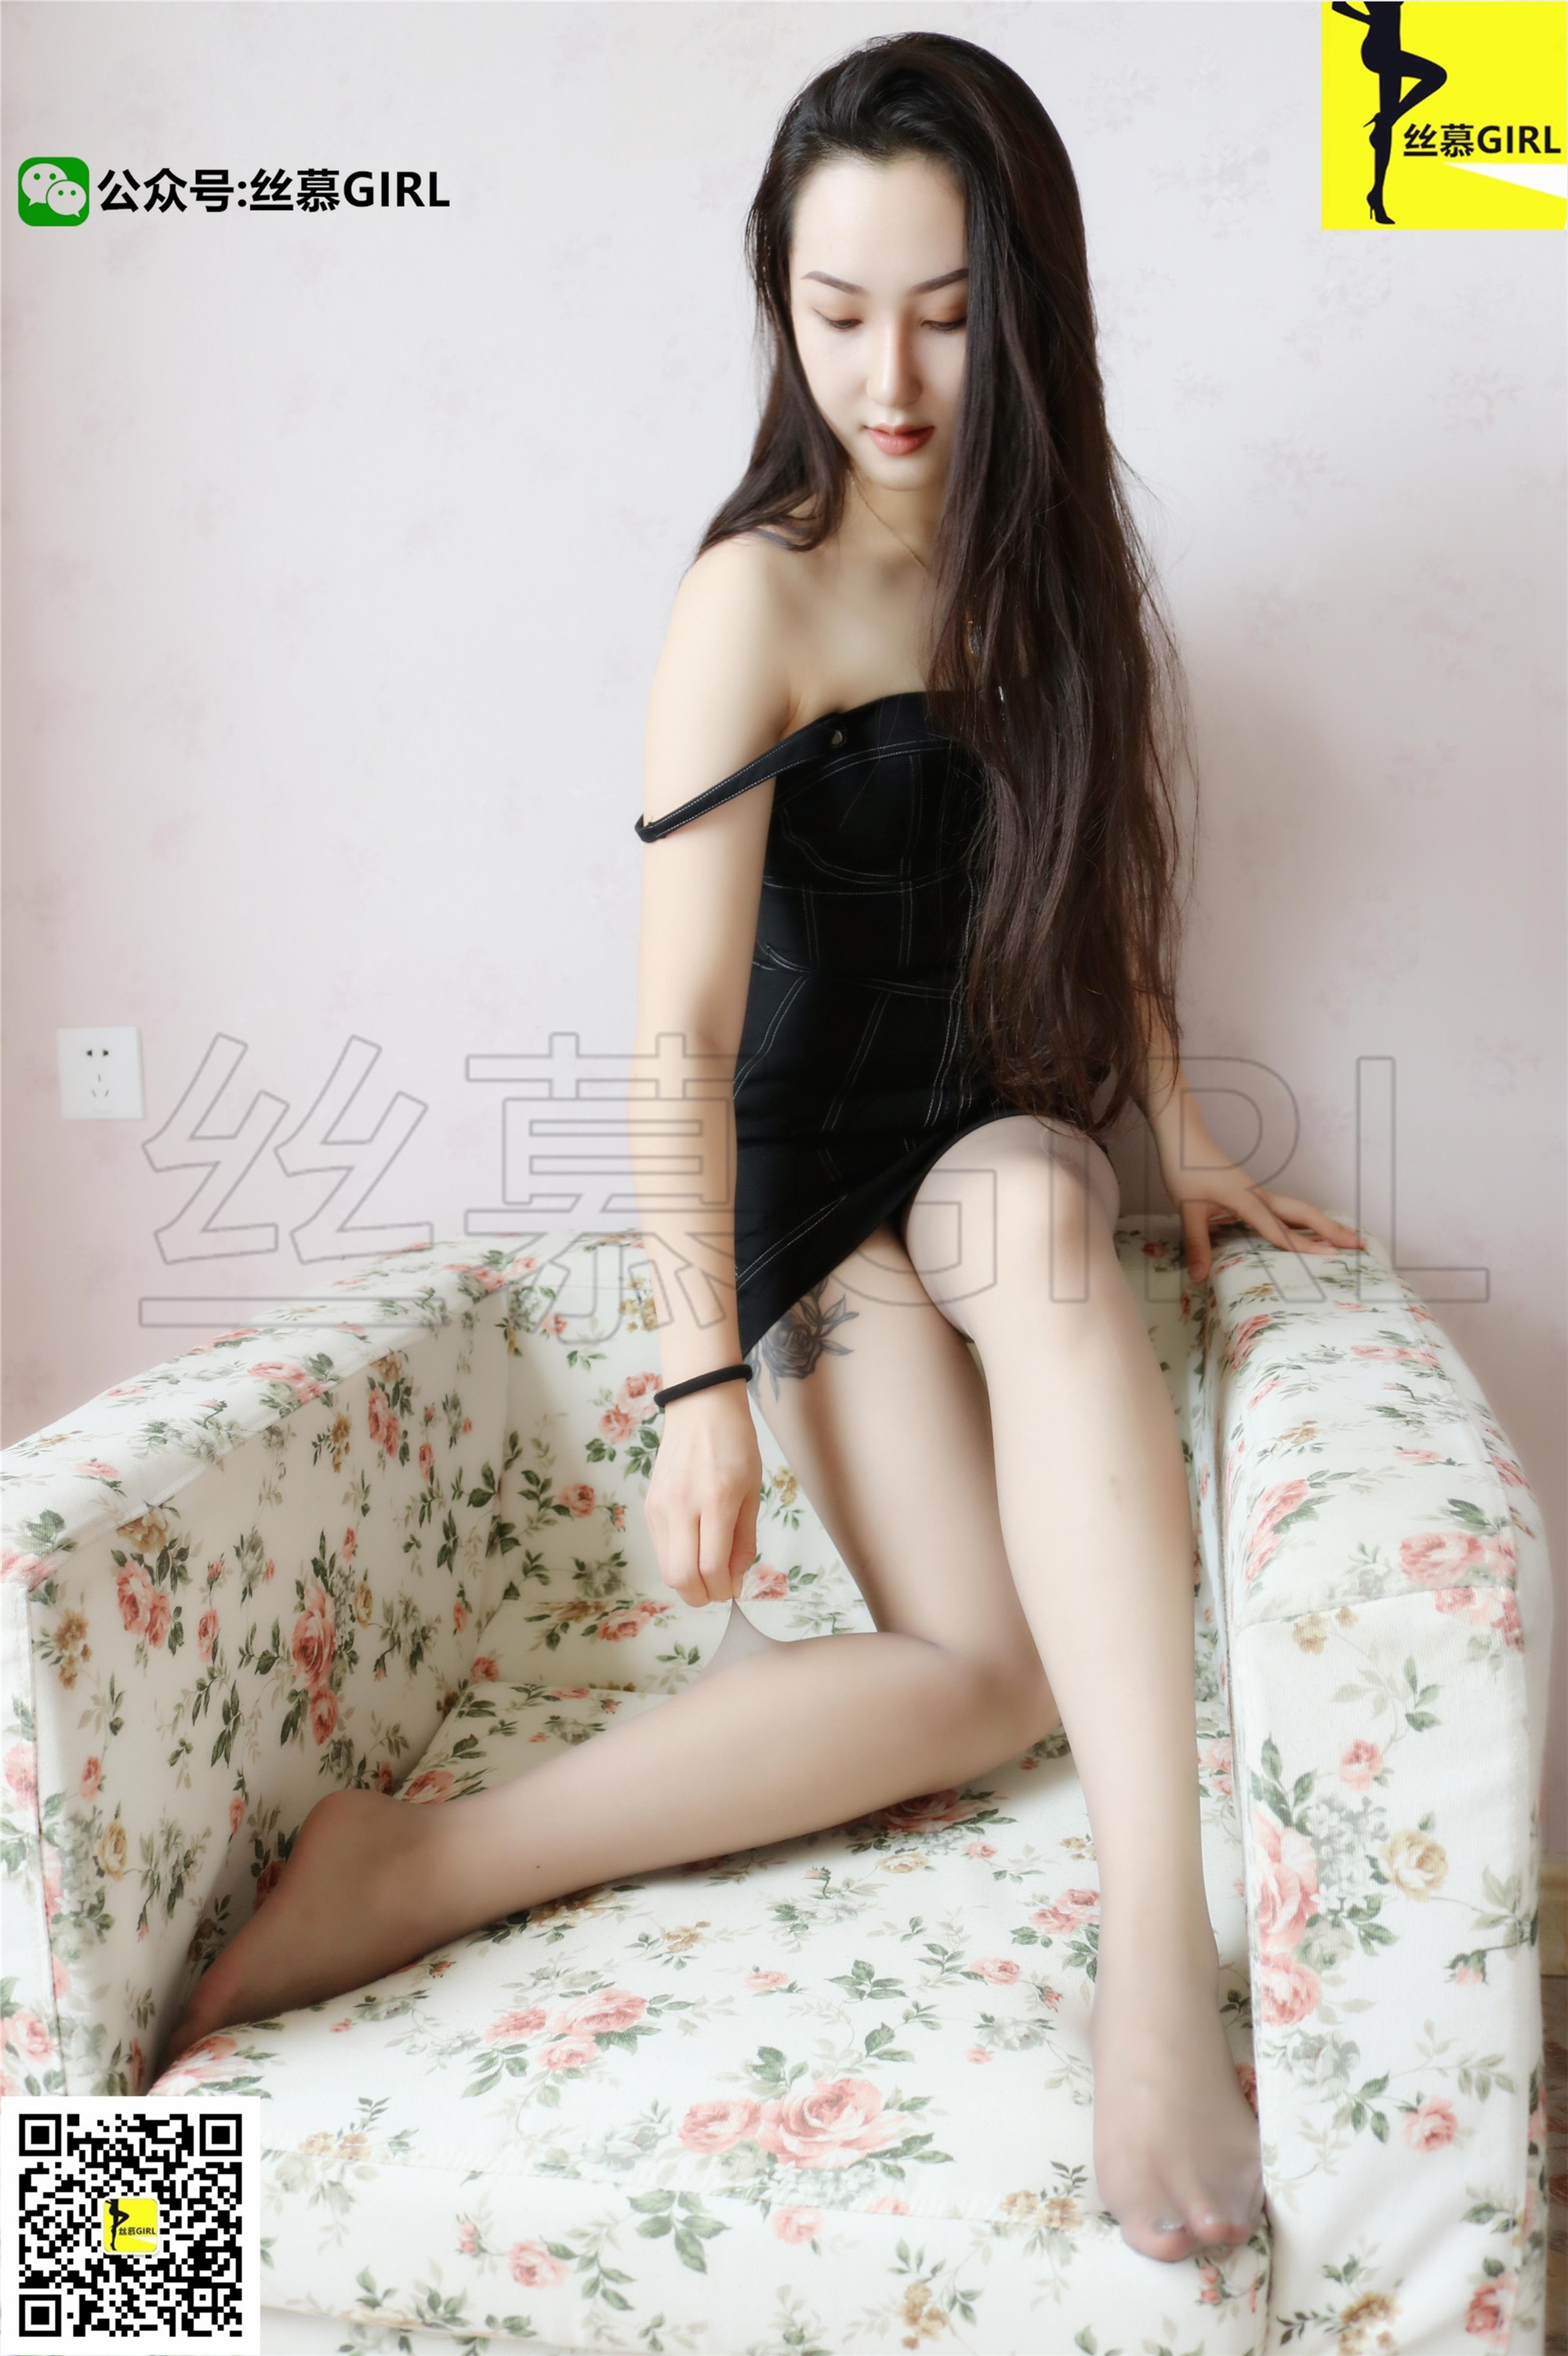 Simu photo No.015 model: Yin in charge of simi series - silk stockings and snake